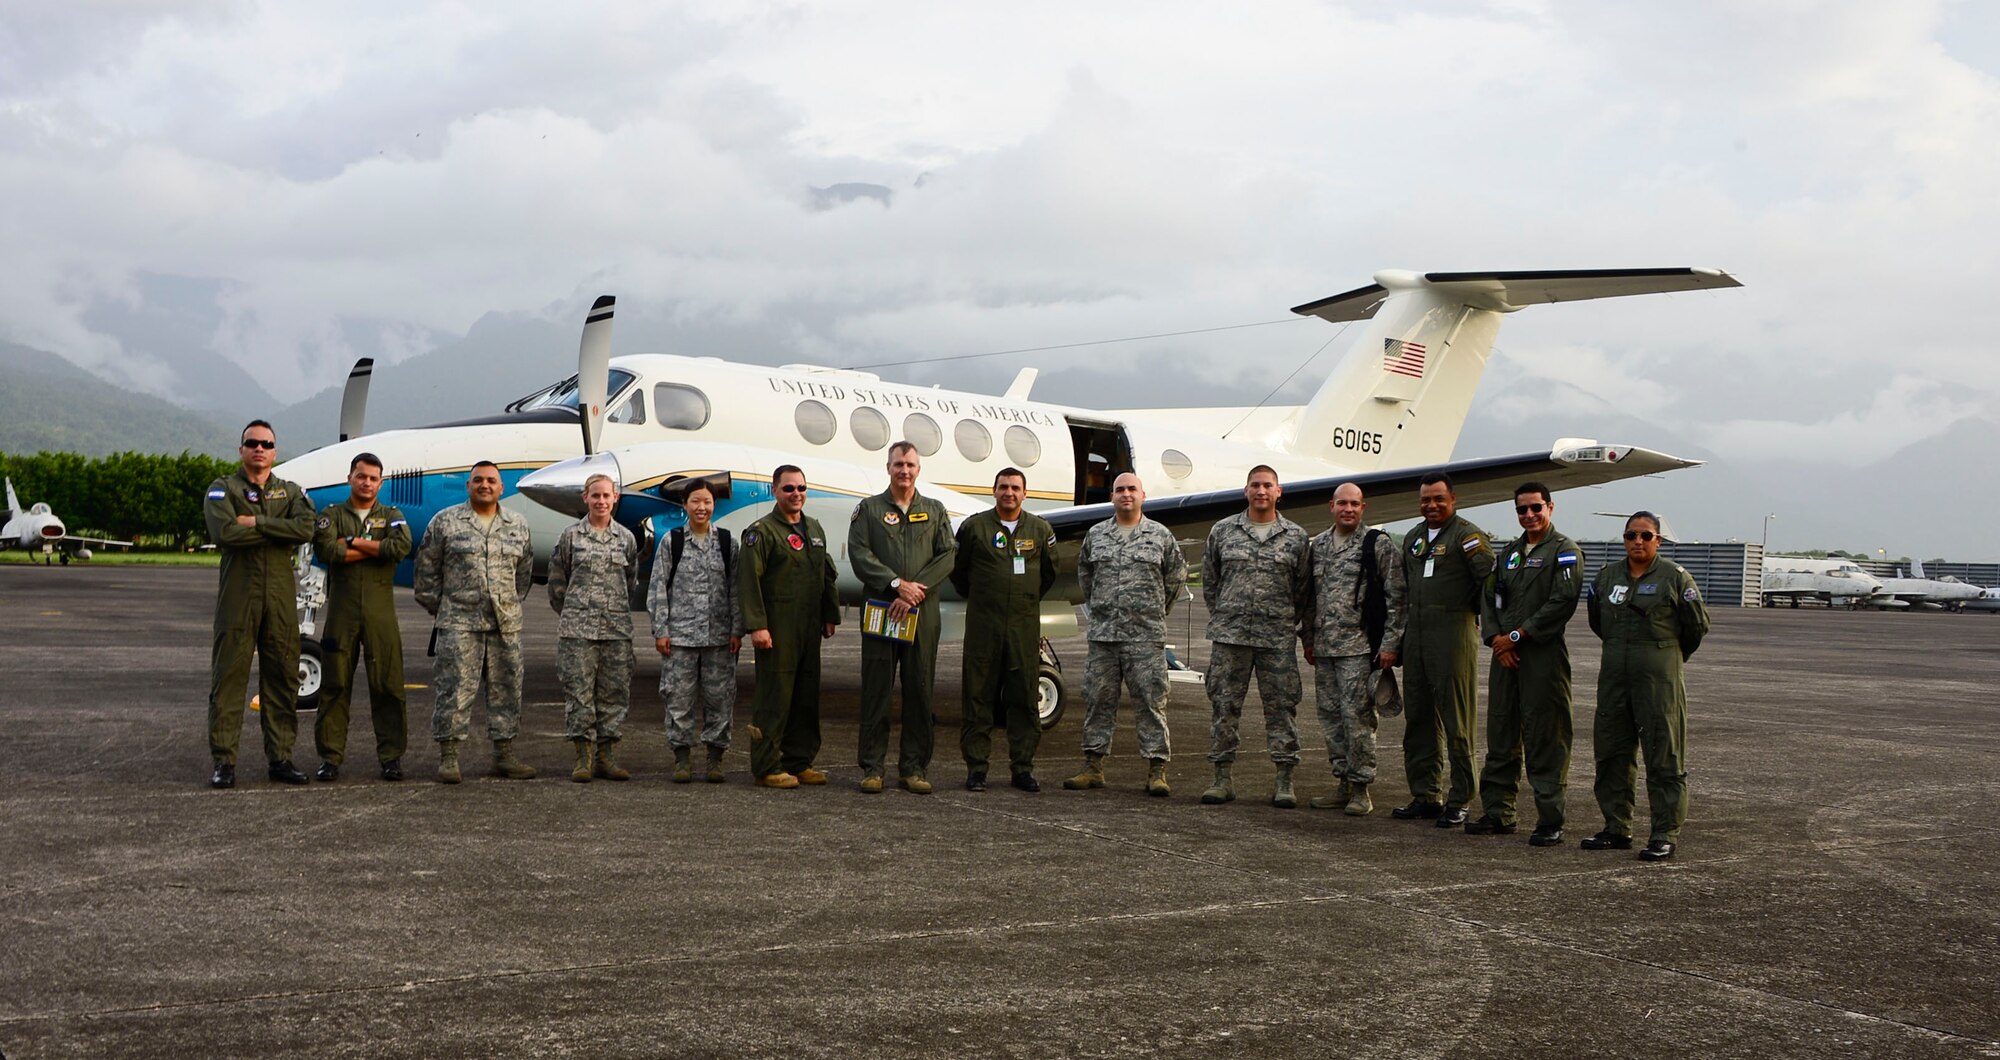 A five-member assessment team from 12th  Air Force (Air Forces Southern), Davis-Monthan Air Force Base, Ariz., and the 571st Mobility Support Advisory Squadron from Travis Air Force Base, Cali., pose with U.S. Embassy officials and members from the Honduran air force during a capabilities assessment of Col Hector Caraccioli Moncada Air Base, La Ceiba, Honduras, June 18, 2015. The team focused on the communication, intelligence collection and analysis, and maintenance capabilities at Hernan Acosta Mejia Air Base, Soto Cano Air Base, Armand Escalon Espinal Air Base and Hector Caraccioli Moncada Air Base. (U.S. Air Force photo by Tech. Sgt. Heather R. Redman/Released)